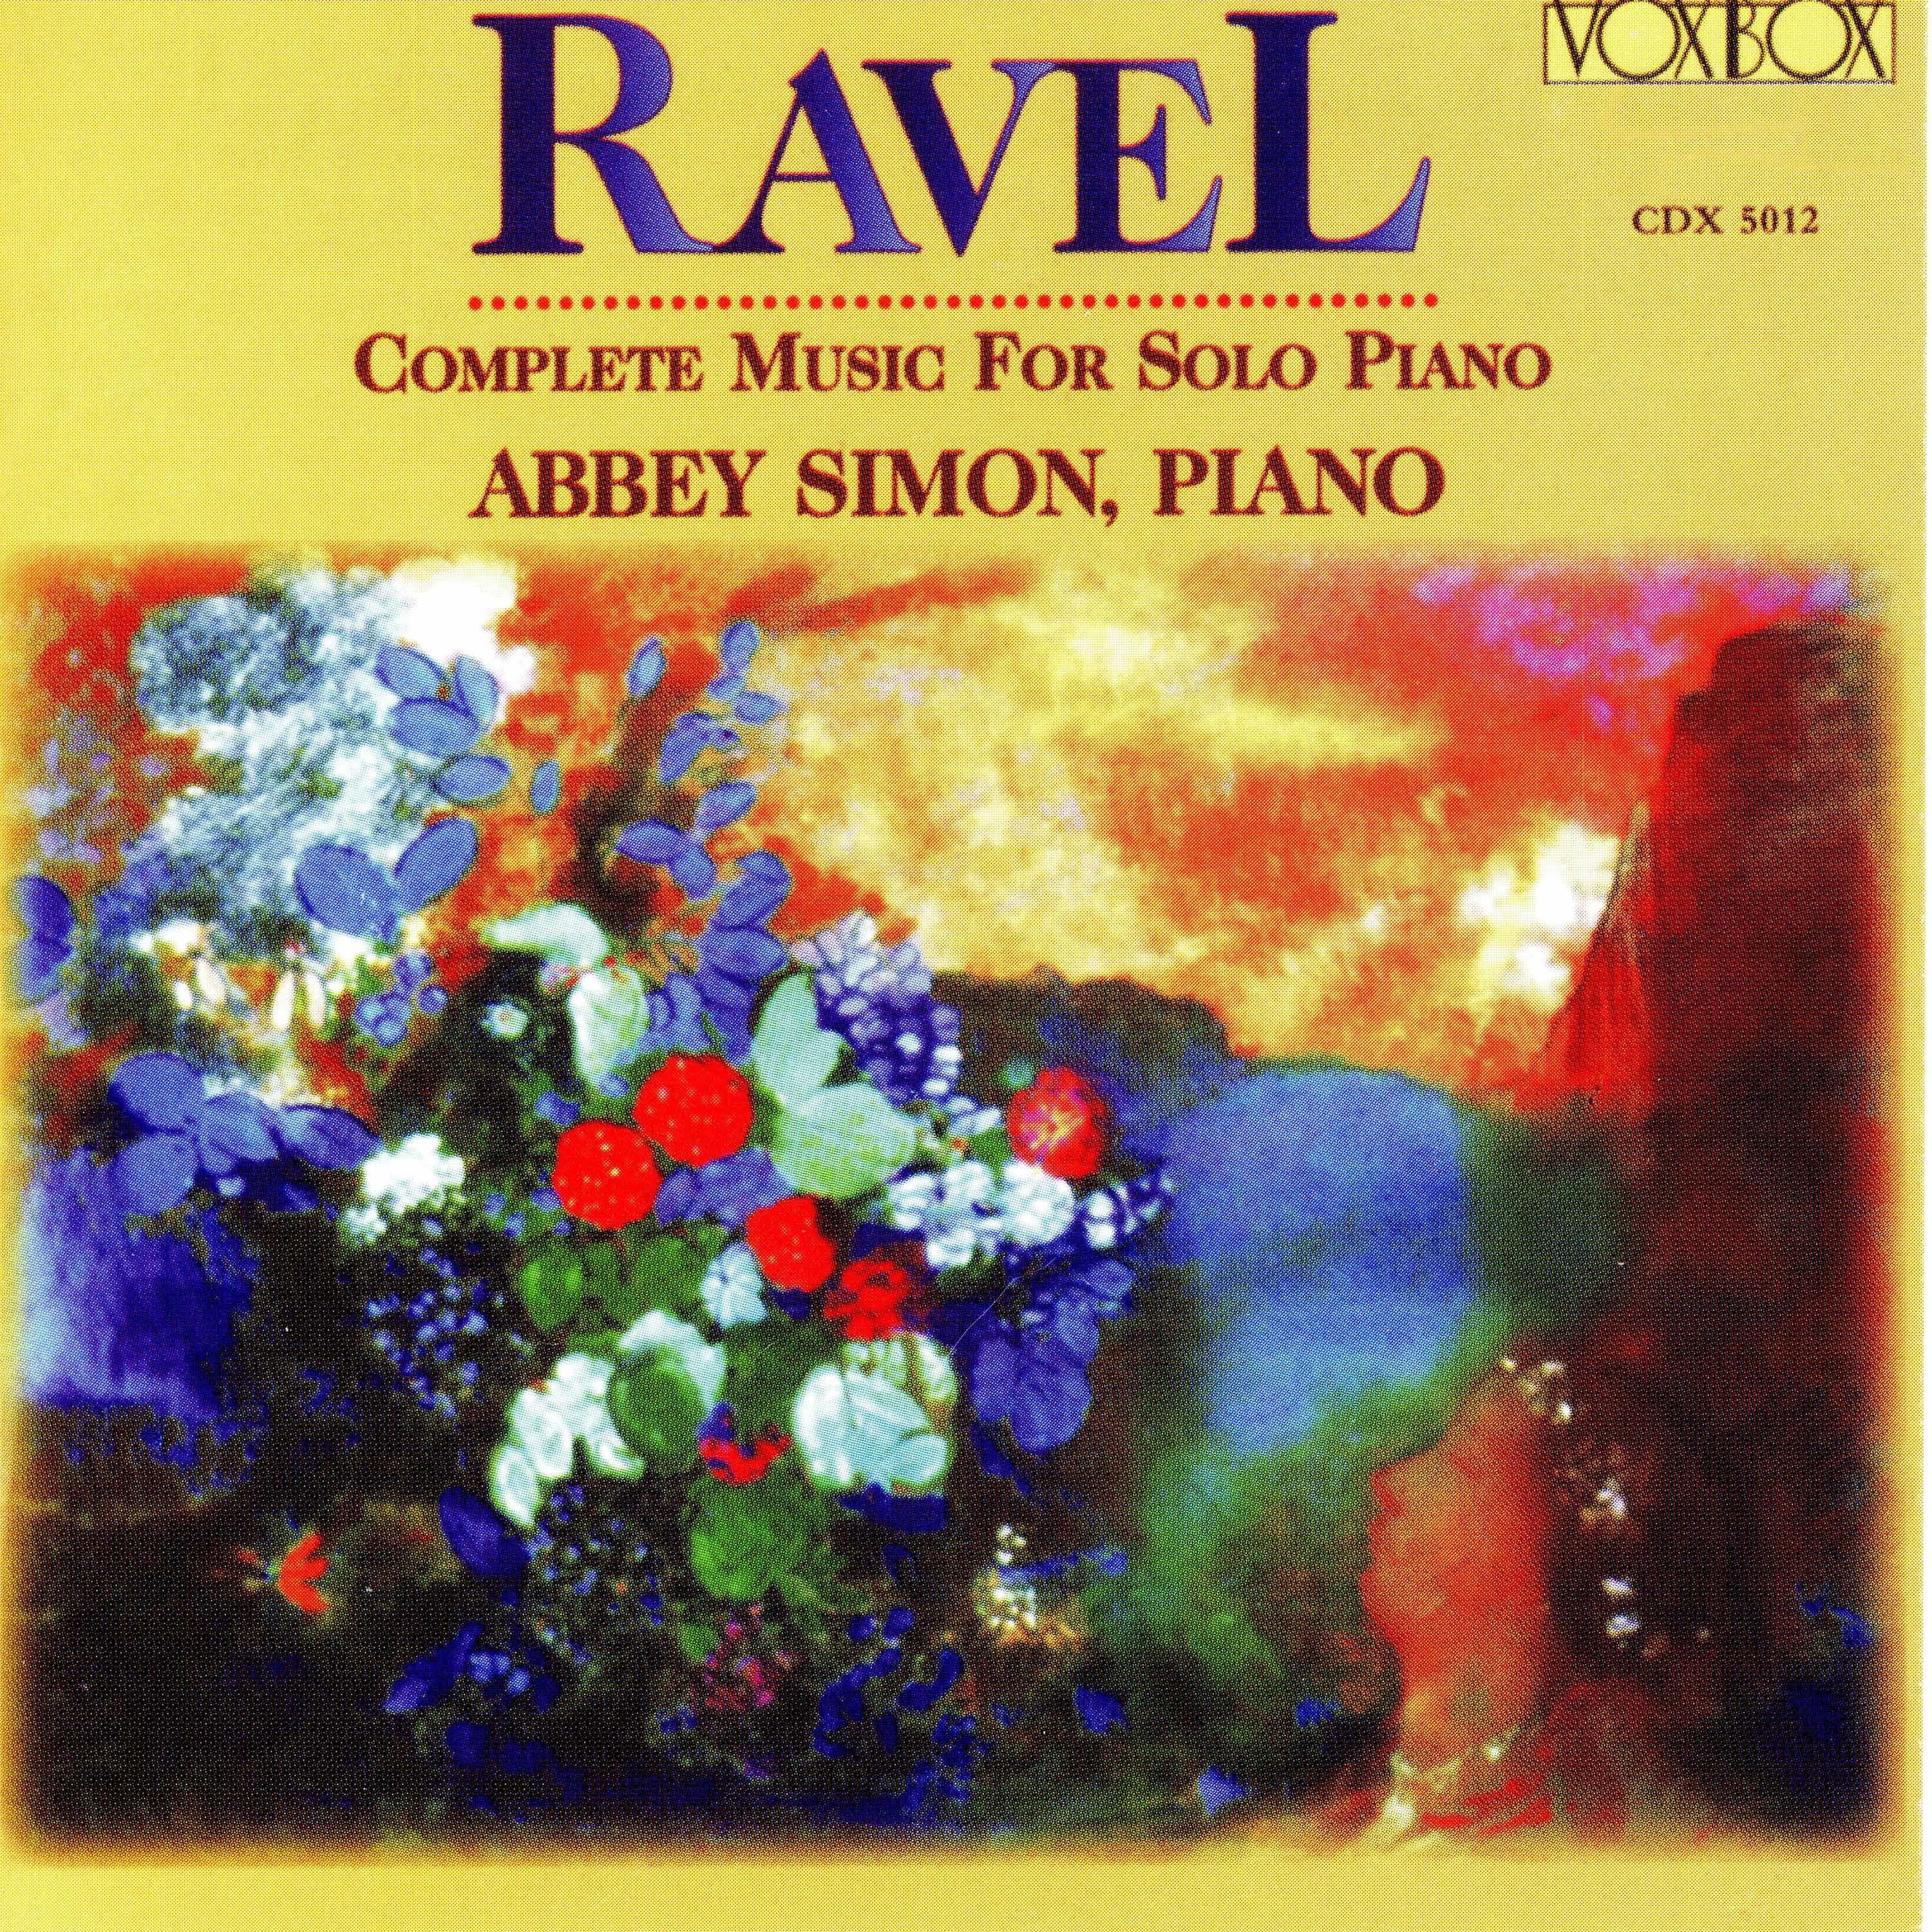 Abbey Simon - Ravel Complete Music for Solo Piano cd02